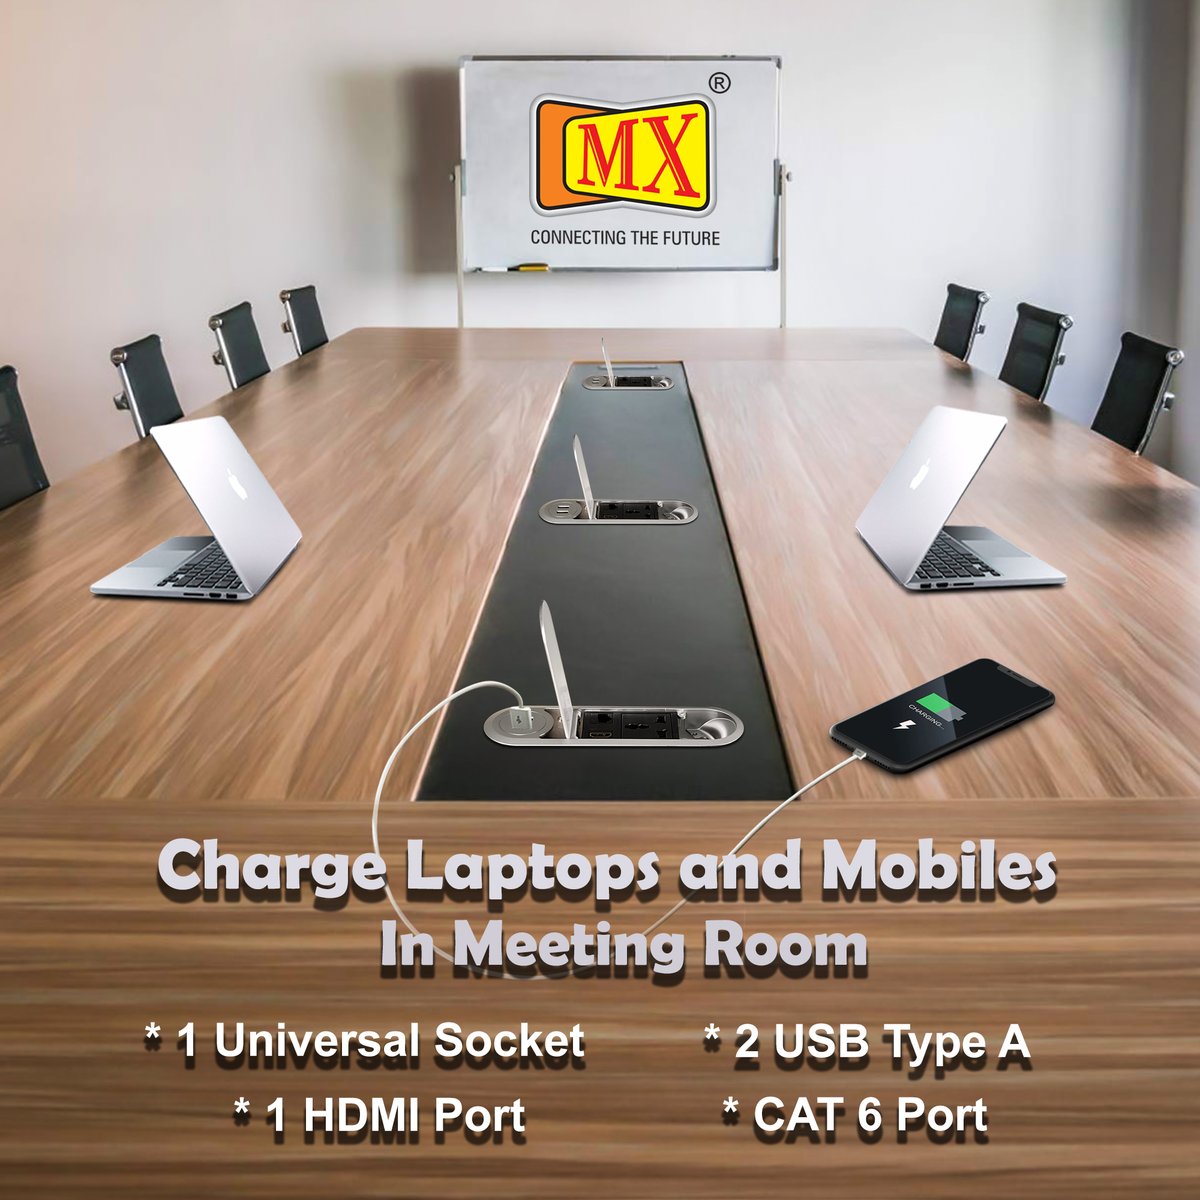 We are pleased to introduce our newly launched Desktop Conceal Power Outlet.

Buy Link: bit.ly/3n6h4IP

#MXPowerOutlet #DesktopConcealOutlet #IndianTechnology #InnovativeDesign #SmartWorkspace #ConvenientCharging #PoweringYourProductivity #EfficientEnergy #ModernOffice